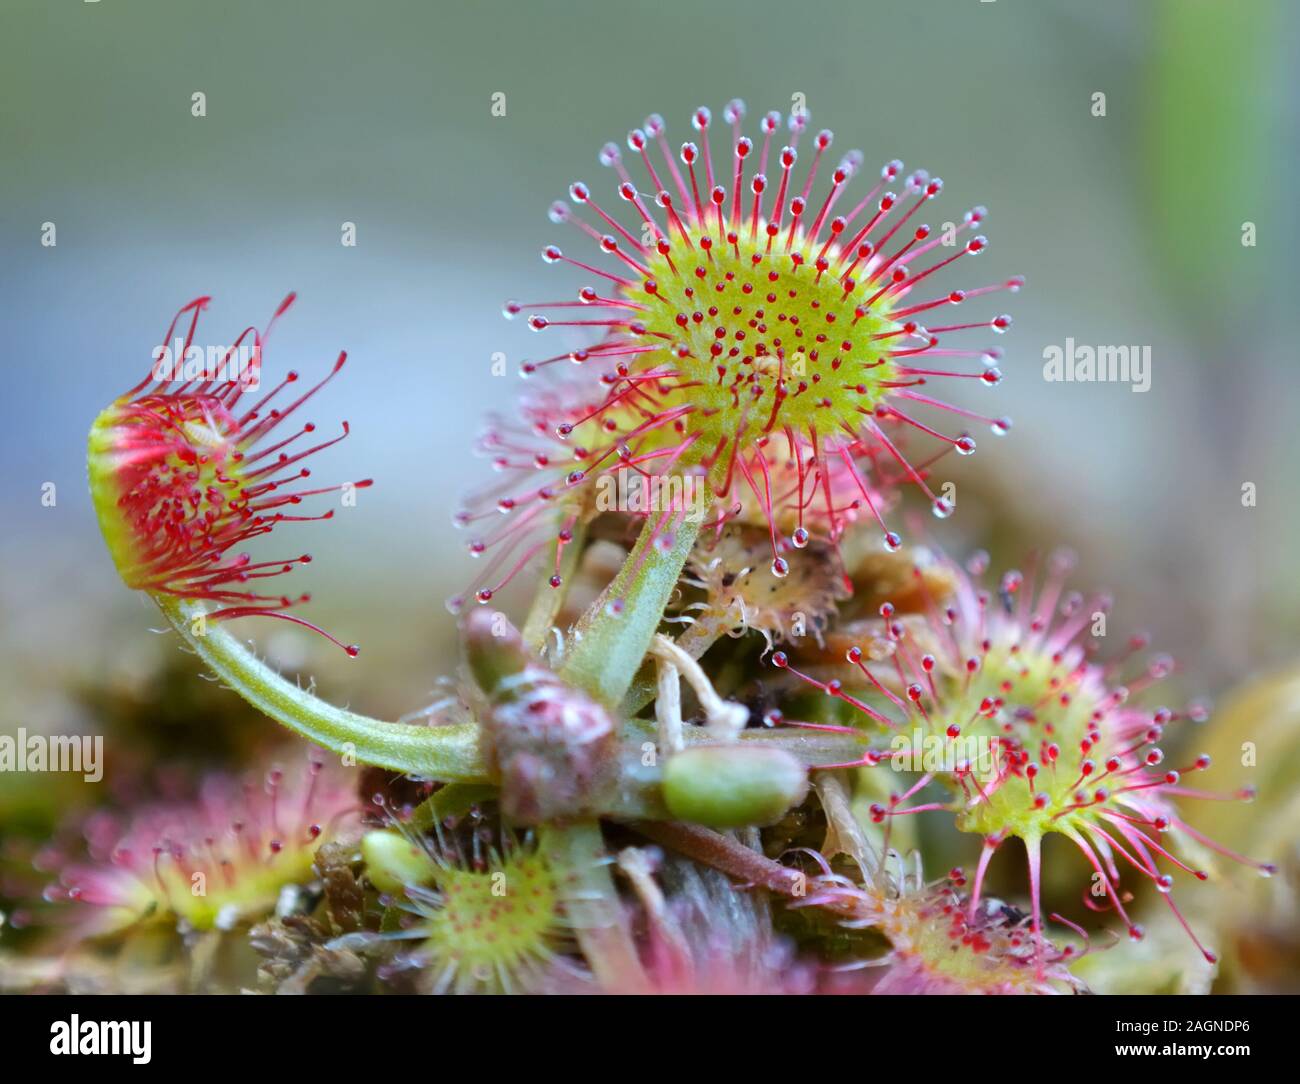 Drosera rotundifolia (the common sundew or round-leaved sundew) is a species of sundew, a carnivorous plant often found in bogs, marshes and fens. Stock Photo